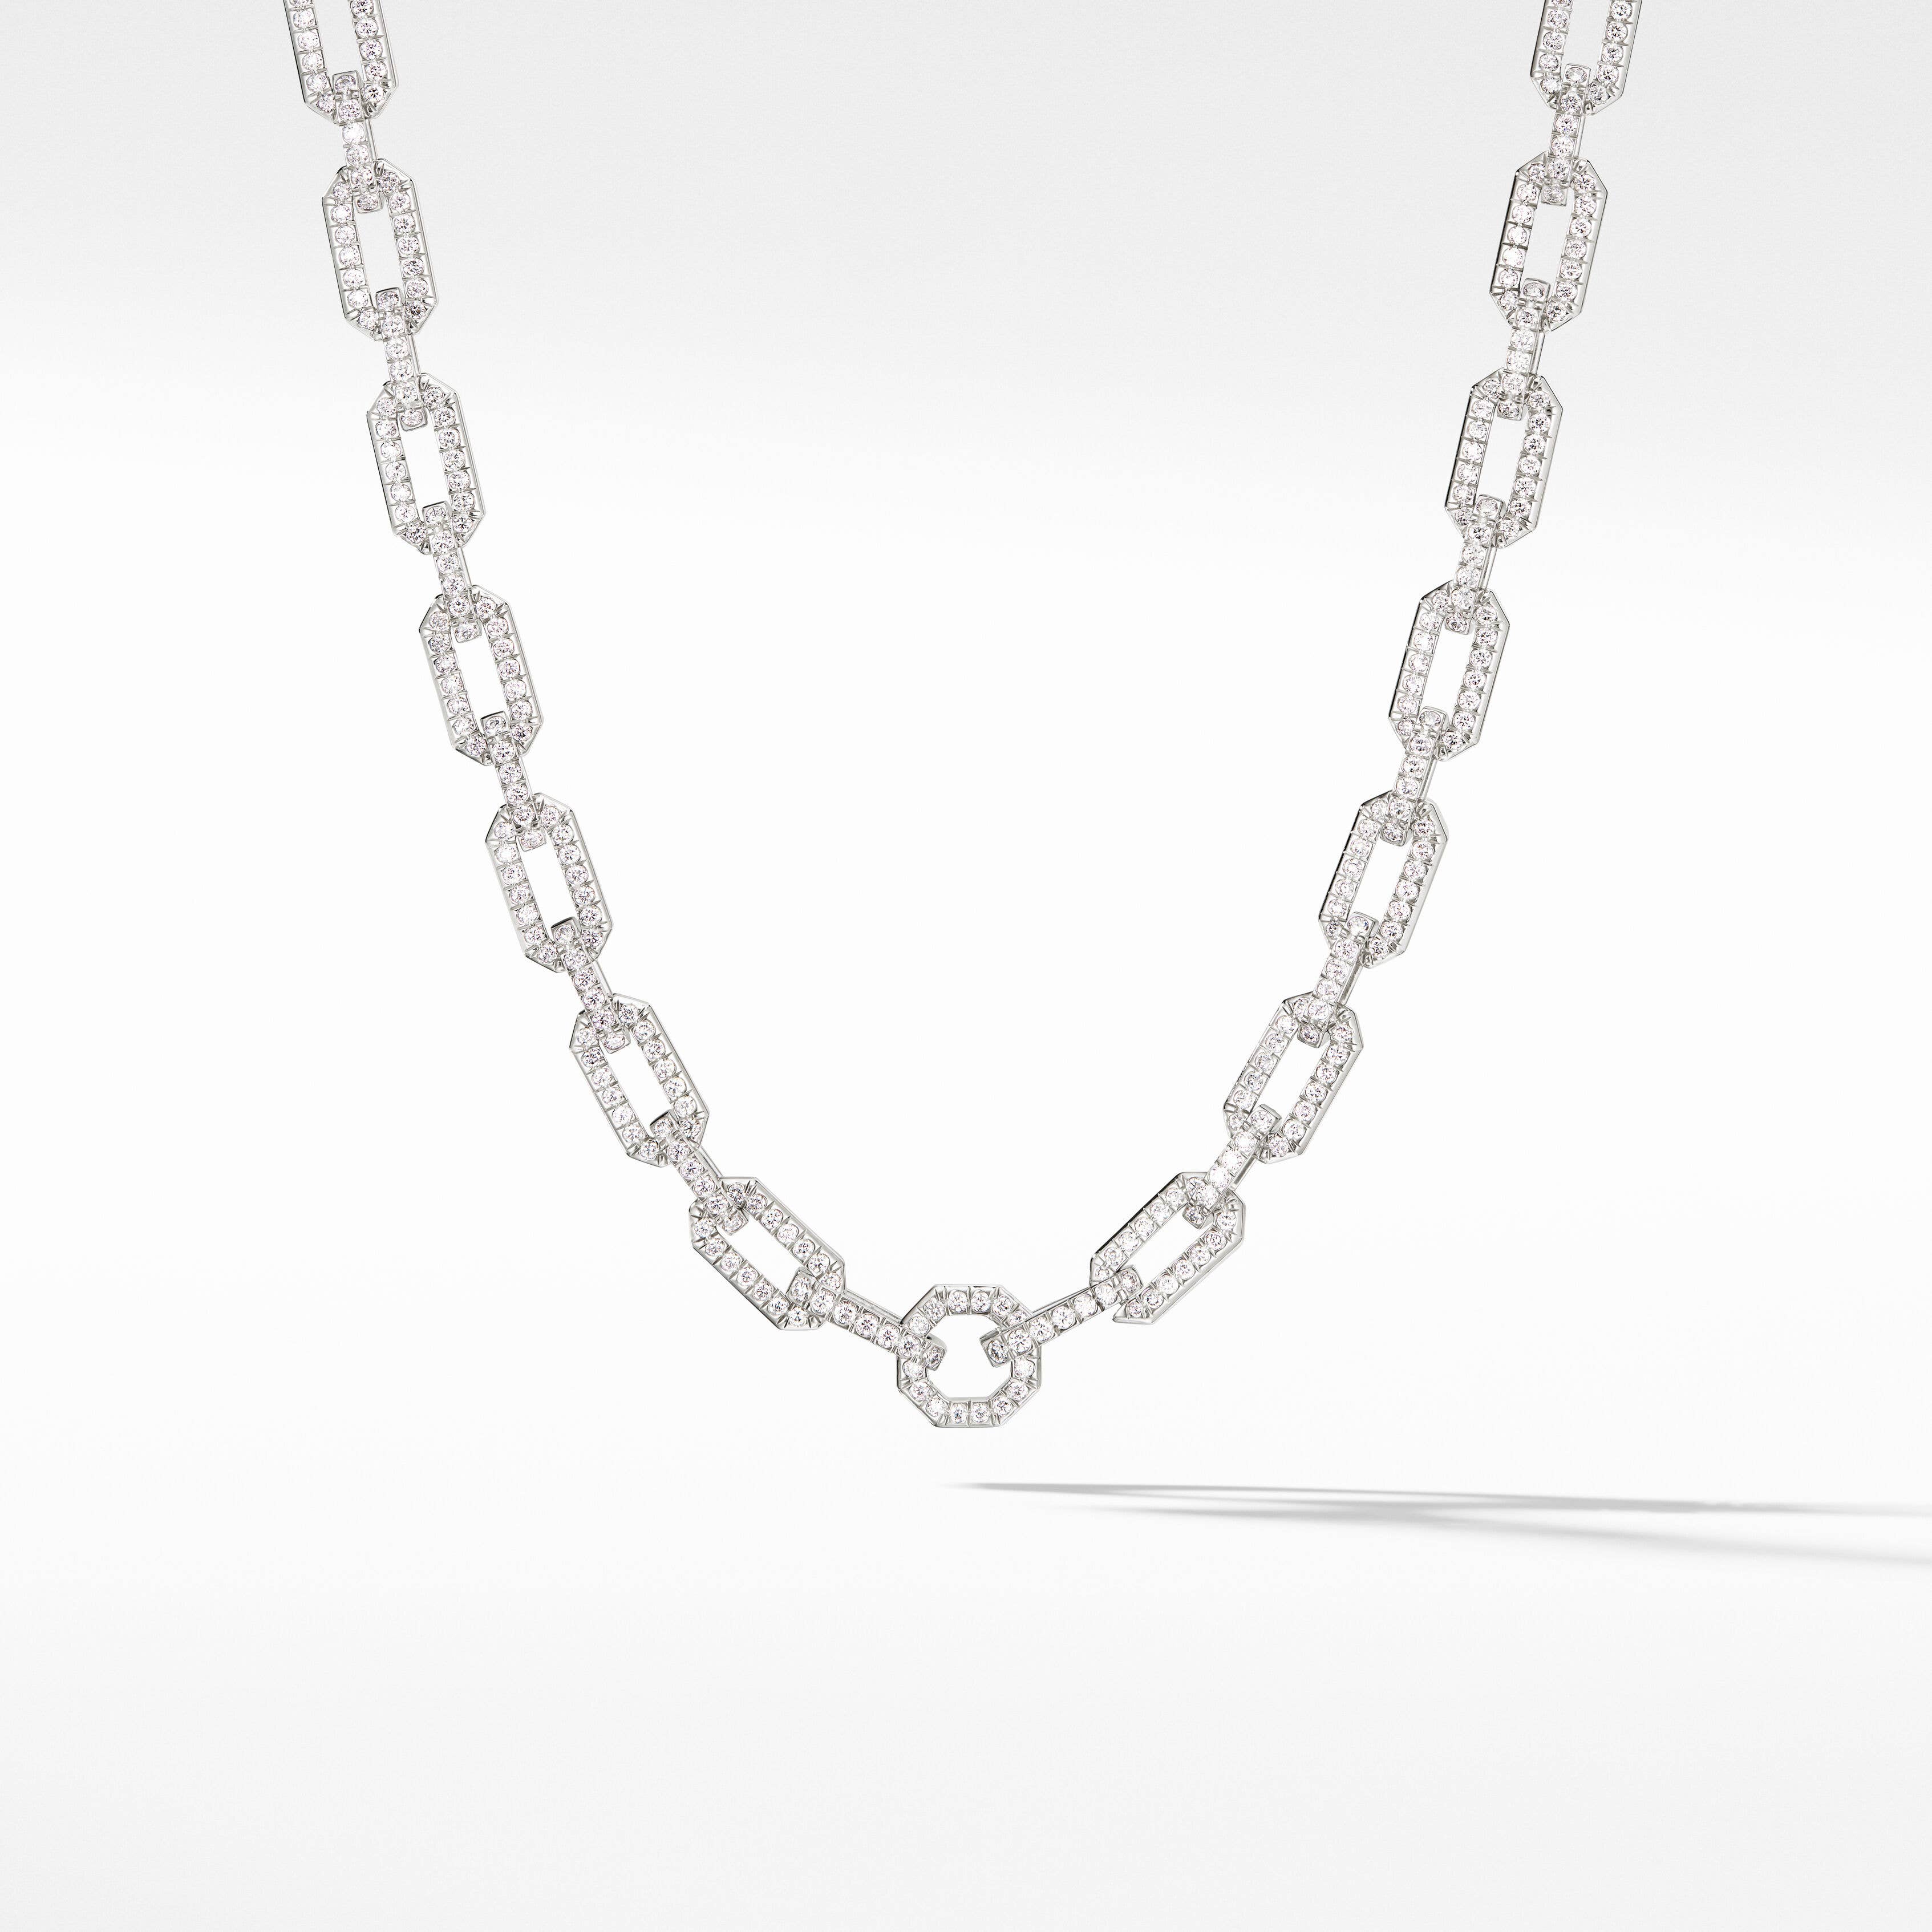 Pavé Chain Necklace in 18K White Gold with Diamonds